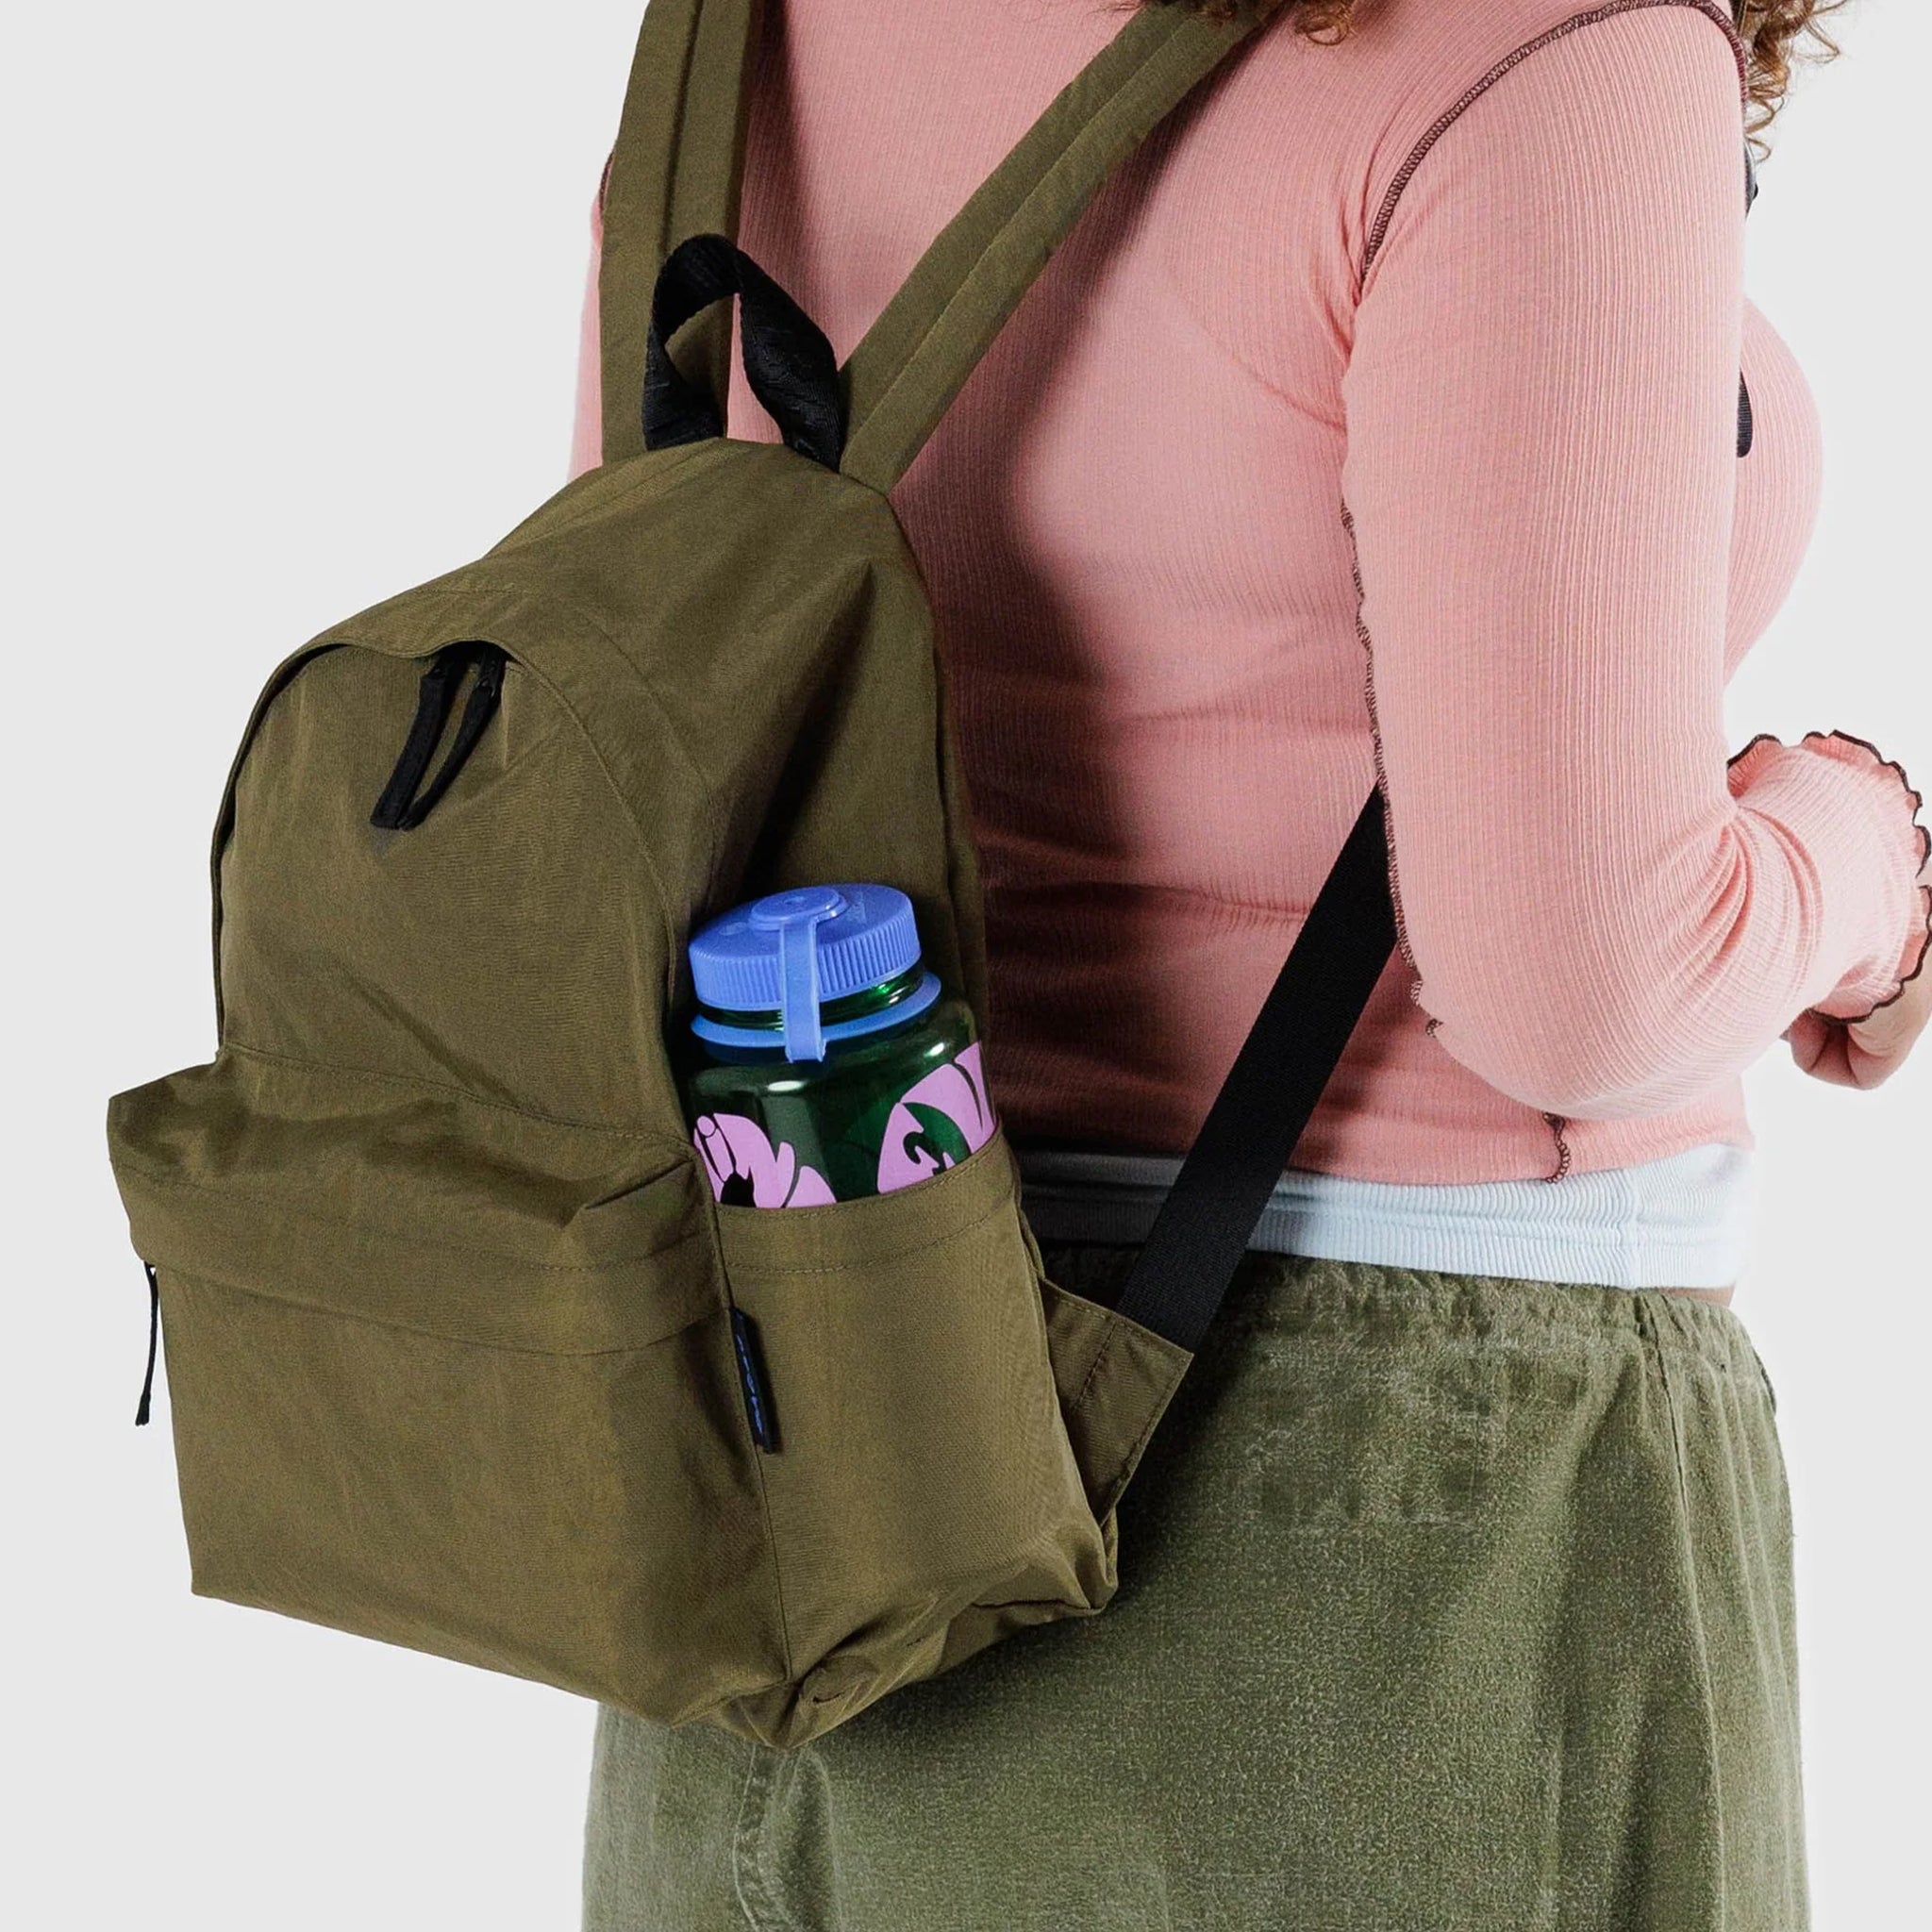 A dark green nylon backpack with side pockets, two front zipper compartments and black straps.